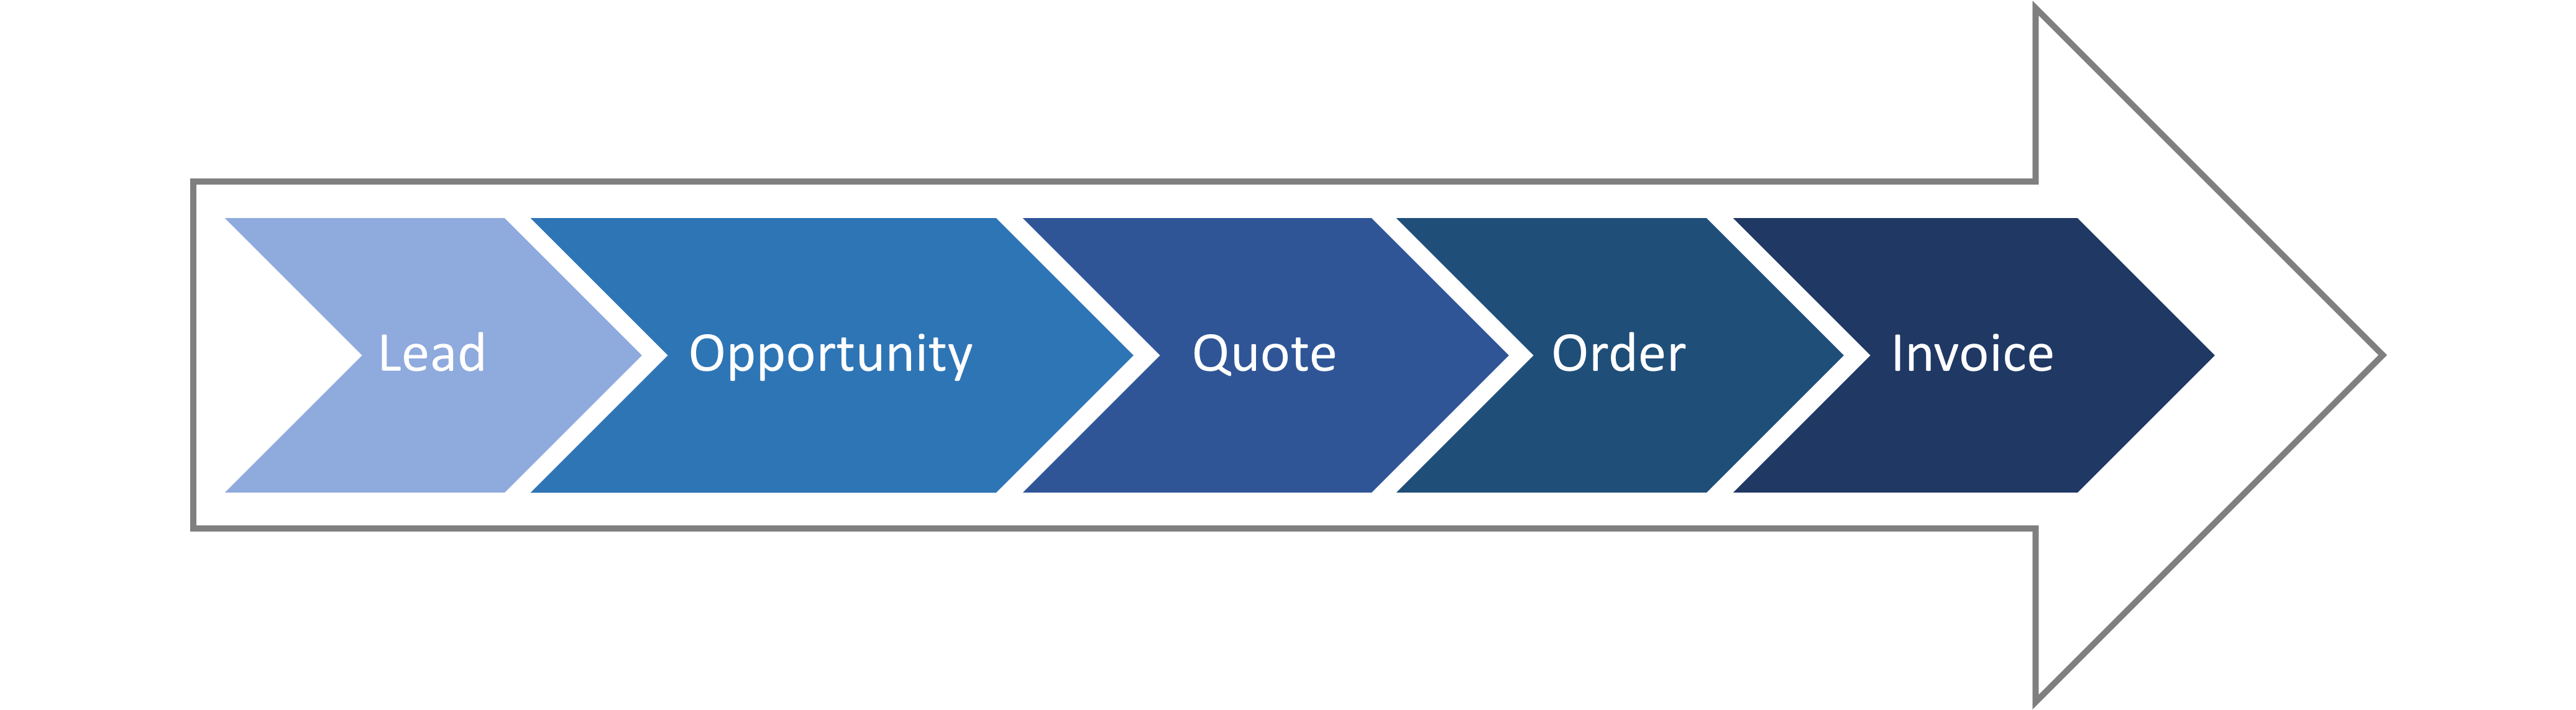 Diagram of the sales process.